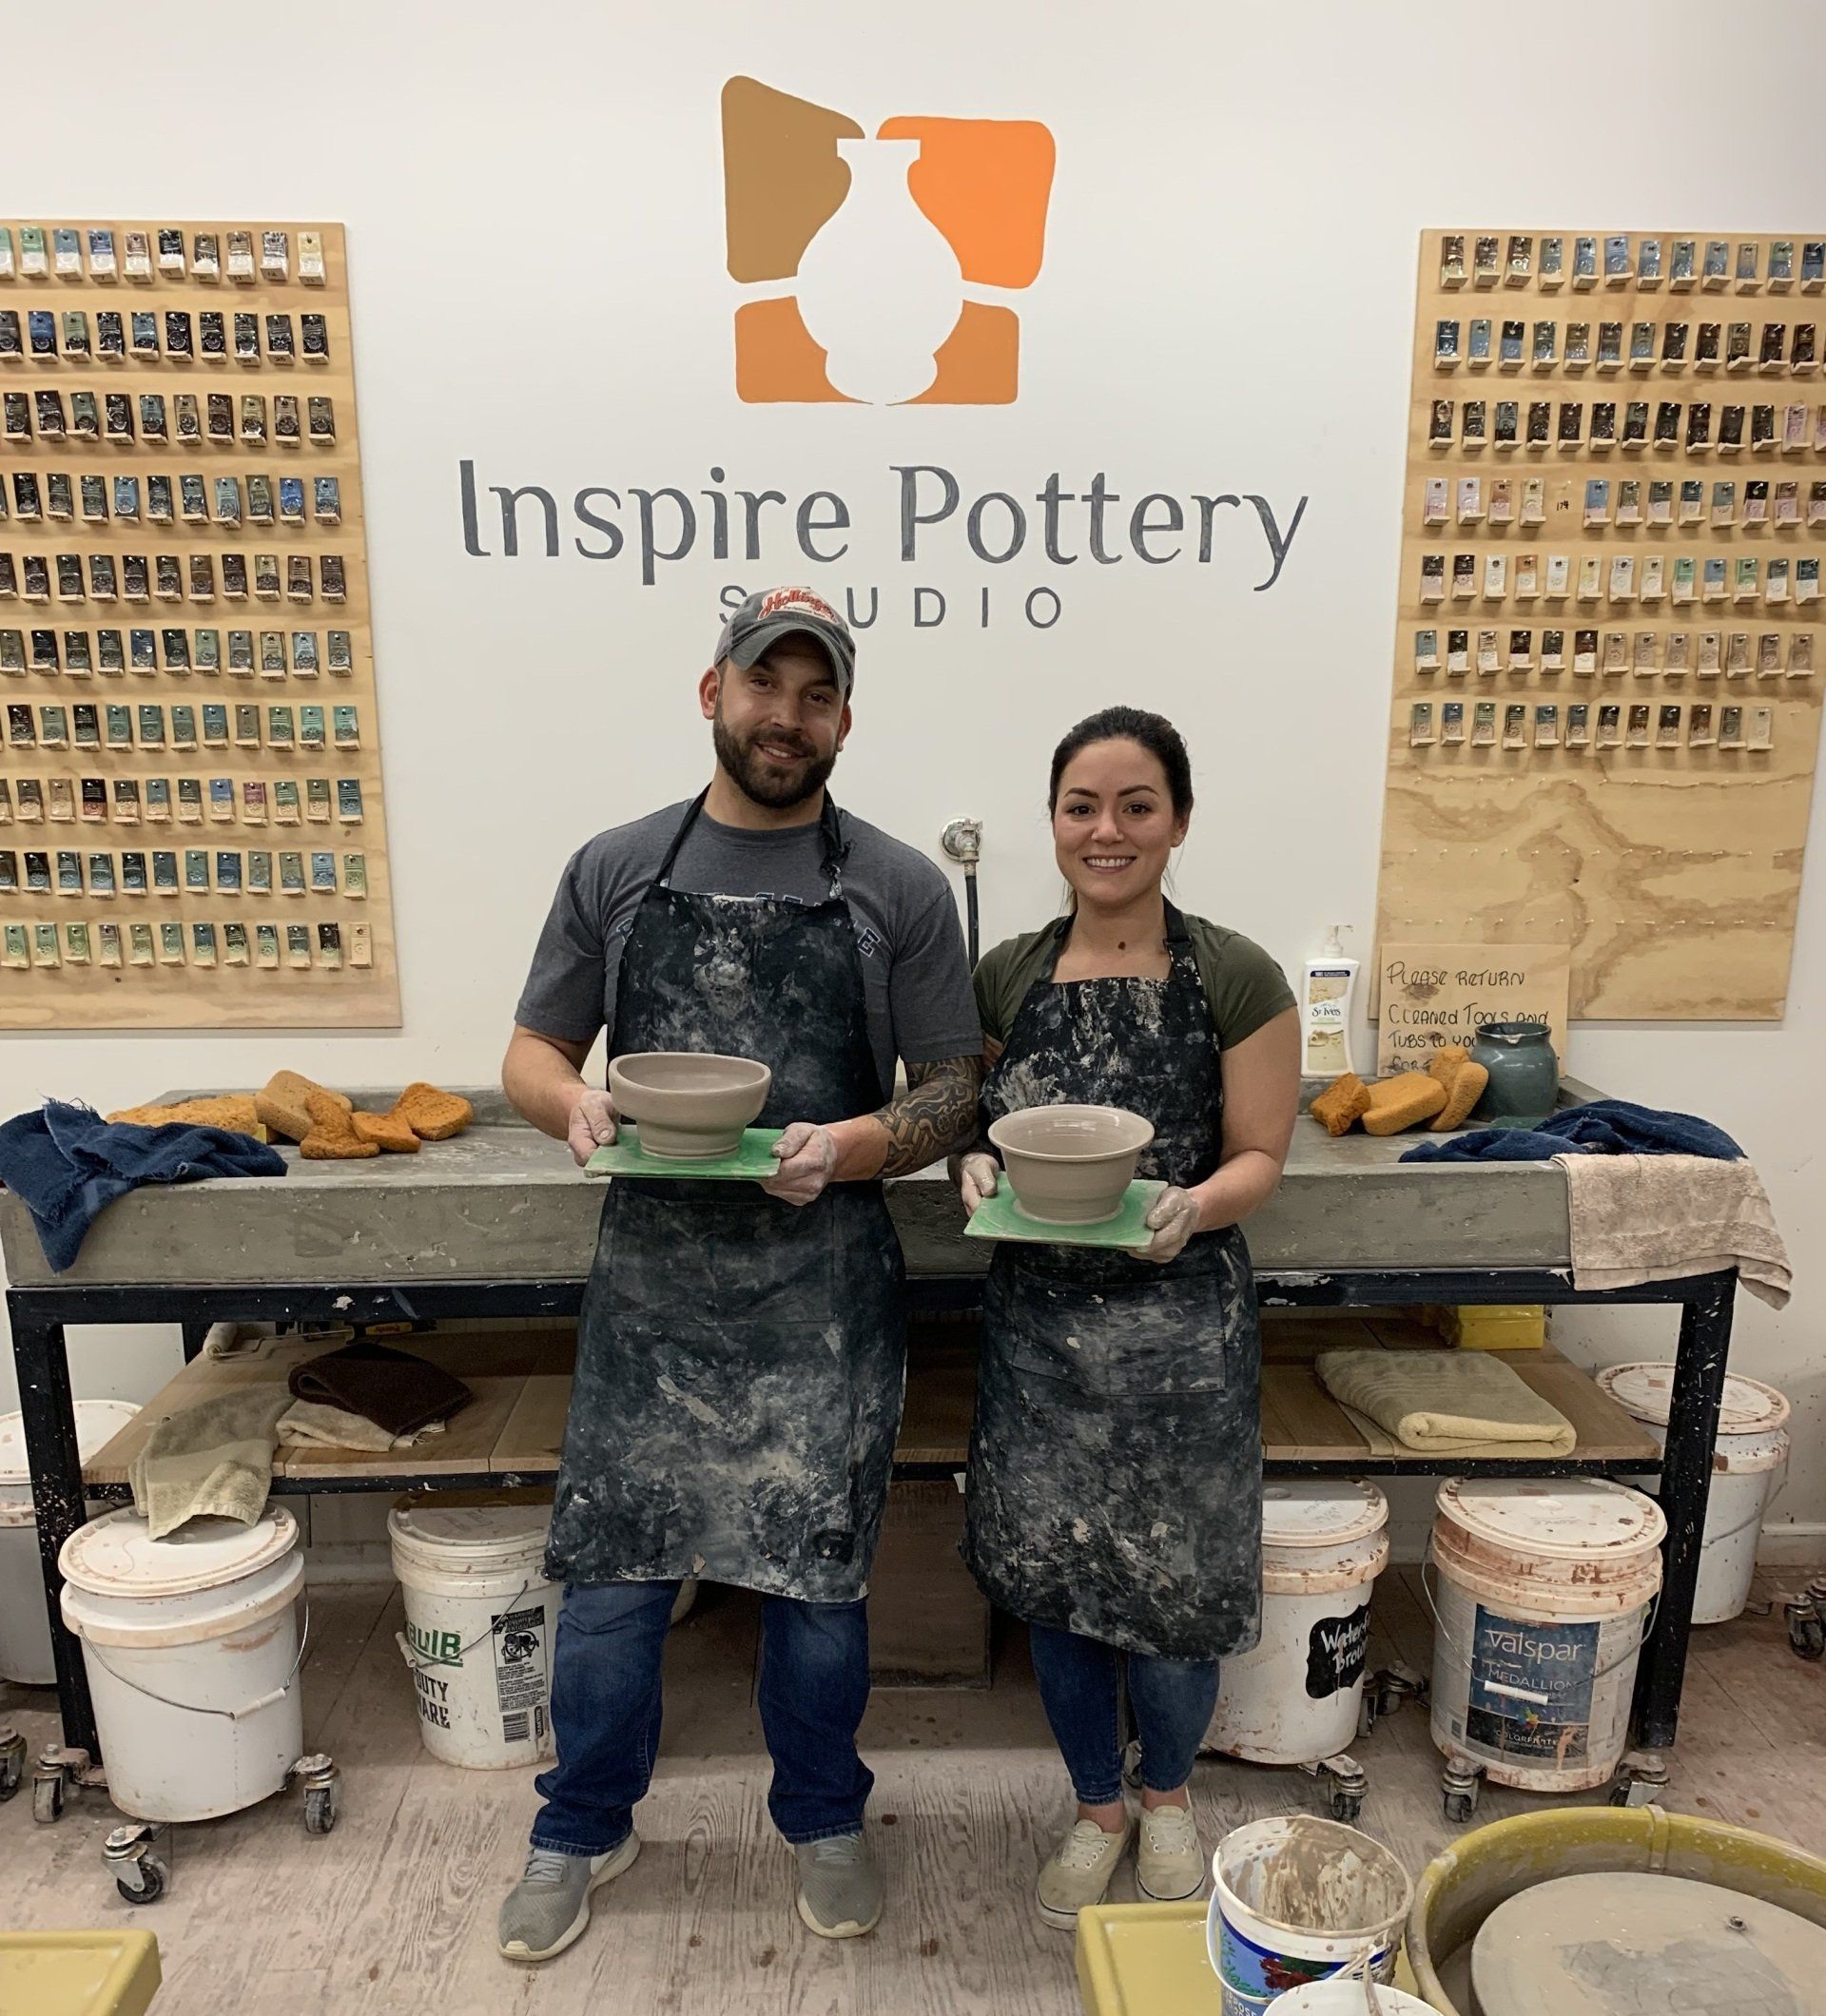 a man and a woman are standing in front of a sign that says inspire pottery